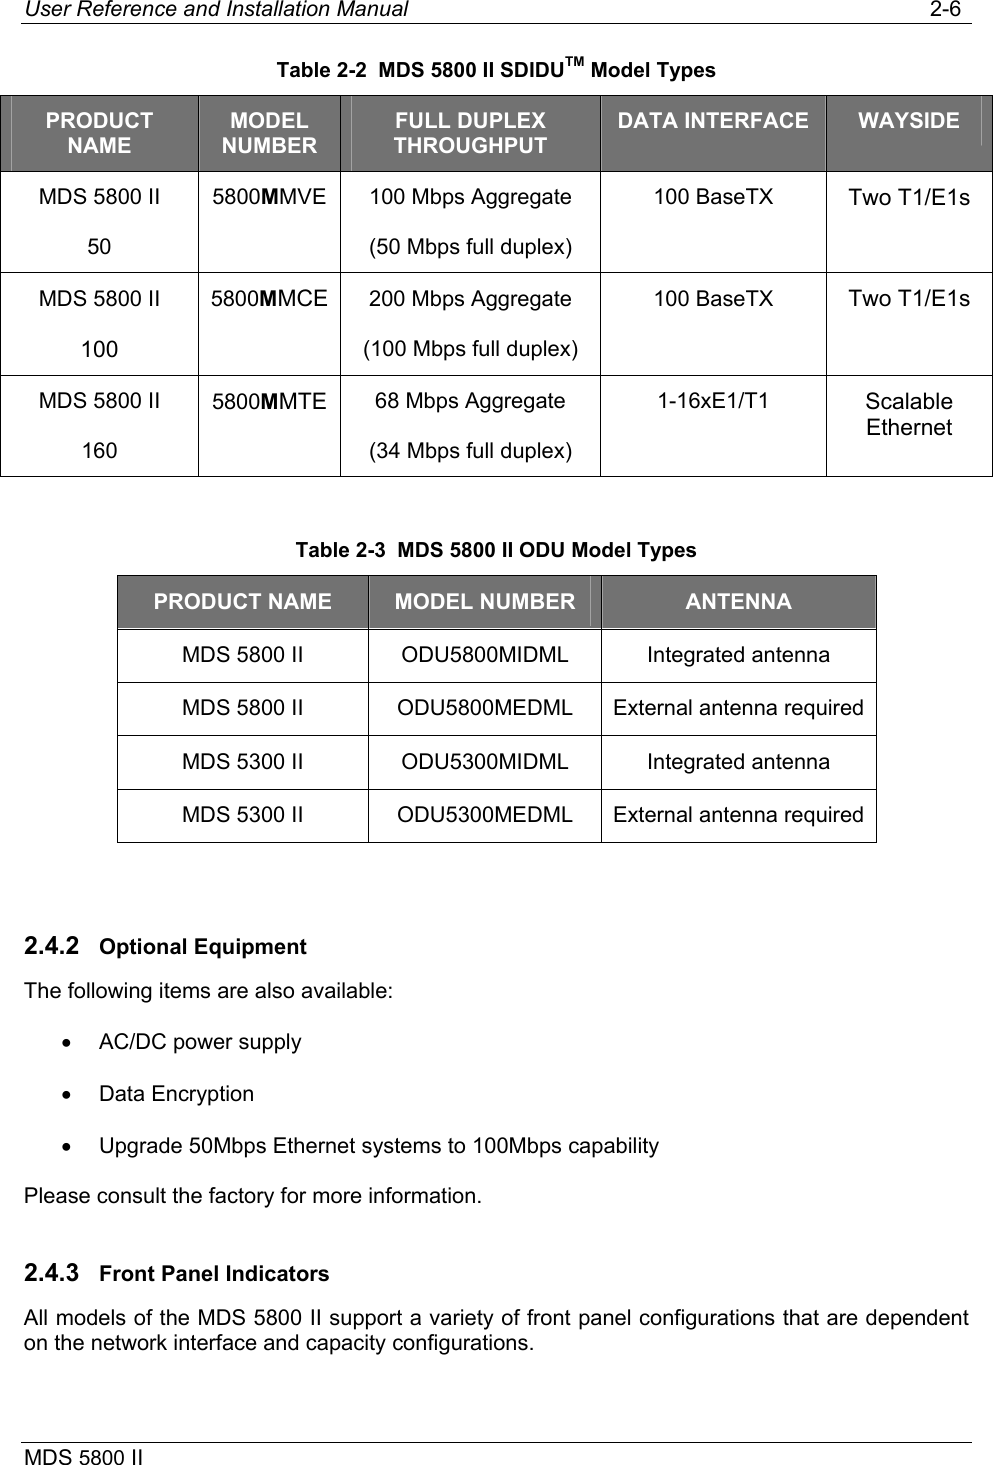 User Reference and Installation Manual   2-6 MDS 5800 II      Table 2-2  MDS 5800 II SDIDUTM Model Types PRODUCT NAME MODEL NUMBER FULL DUPLEX THROUGHPUT DATA INTERFACE WAYSIDE MDS 5800 II 50 5800MMVE 100 Mbps Aggregate (50 Mbps full duplex) 100 BaseTX Two T1/E1s MDS 5800 II  100 5800MMCE  200 Mbps Aggregate (100 Mbps full duplex) 100 BaseTX Two T1/E1s MDS 5800 II  160 5800MMTE  68 Mbps Aggregate (34 Mbps full duplex) 1-16xE1/T1 Scalable Ethernet  Table 2-3  MDS 5800 II ODU Model Types PRODUCT NAME MODEL NUMBER ANTENNA MDS 5800 II ODU5800MIDML Integrated antenna MDS 5800 II ODU5800MEDML External antenna required MDS 5300 II ODU5300MIDML Integrated antenna MDS 5300 II ODU5300MEDML External antenna required  2.4.2  Optional Equipment The following items are also available:  •  AC/DC power supply •  Data Encryption •  Upgrade 50Mbps Ethernet systems to 100Mbps capability Please consult the factory for more information. 2.4.3  Front Panel Indicators All models of the MDS 5800 II support a variety of front panel configurations that are dependent on the network interface and capacity configurations.  